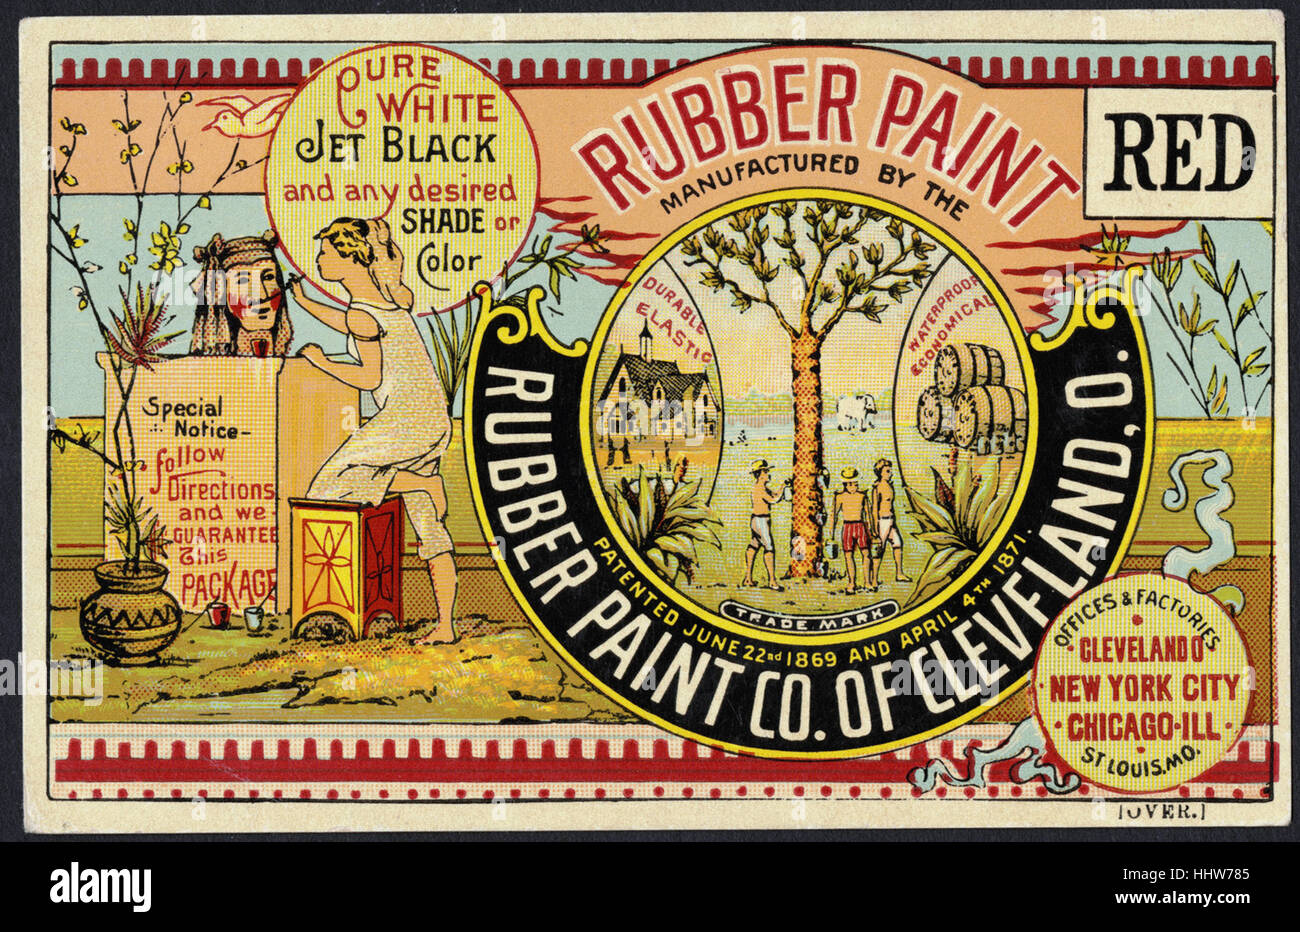 Rubber paint manufactured by the Rubber Paint Co. of Cleveland, O. Pure white, jet black and any desired shade or color. (front)  - Home Furnishings Trade Cards Stock Photo